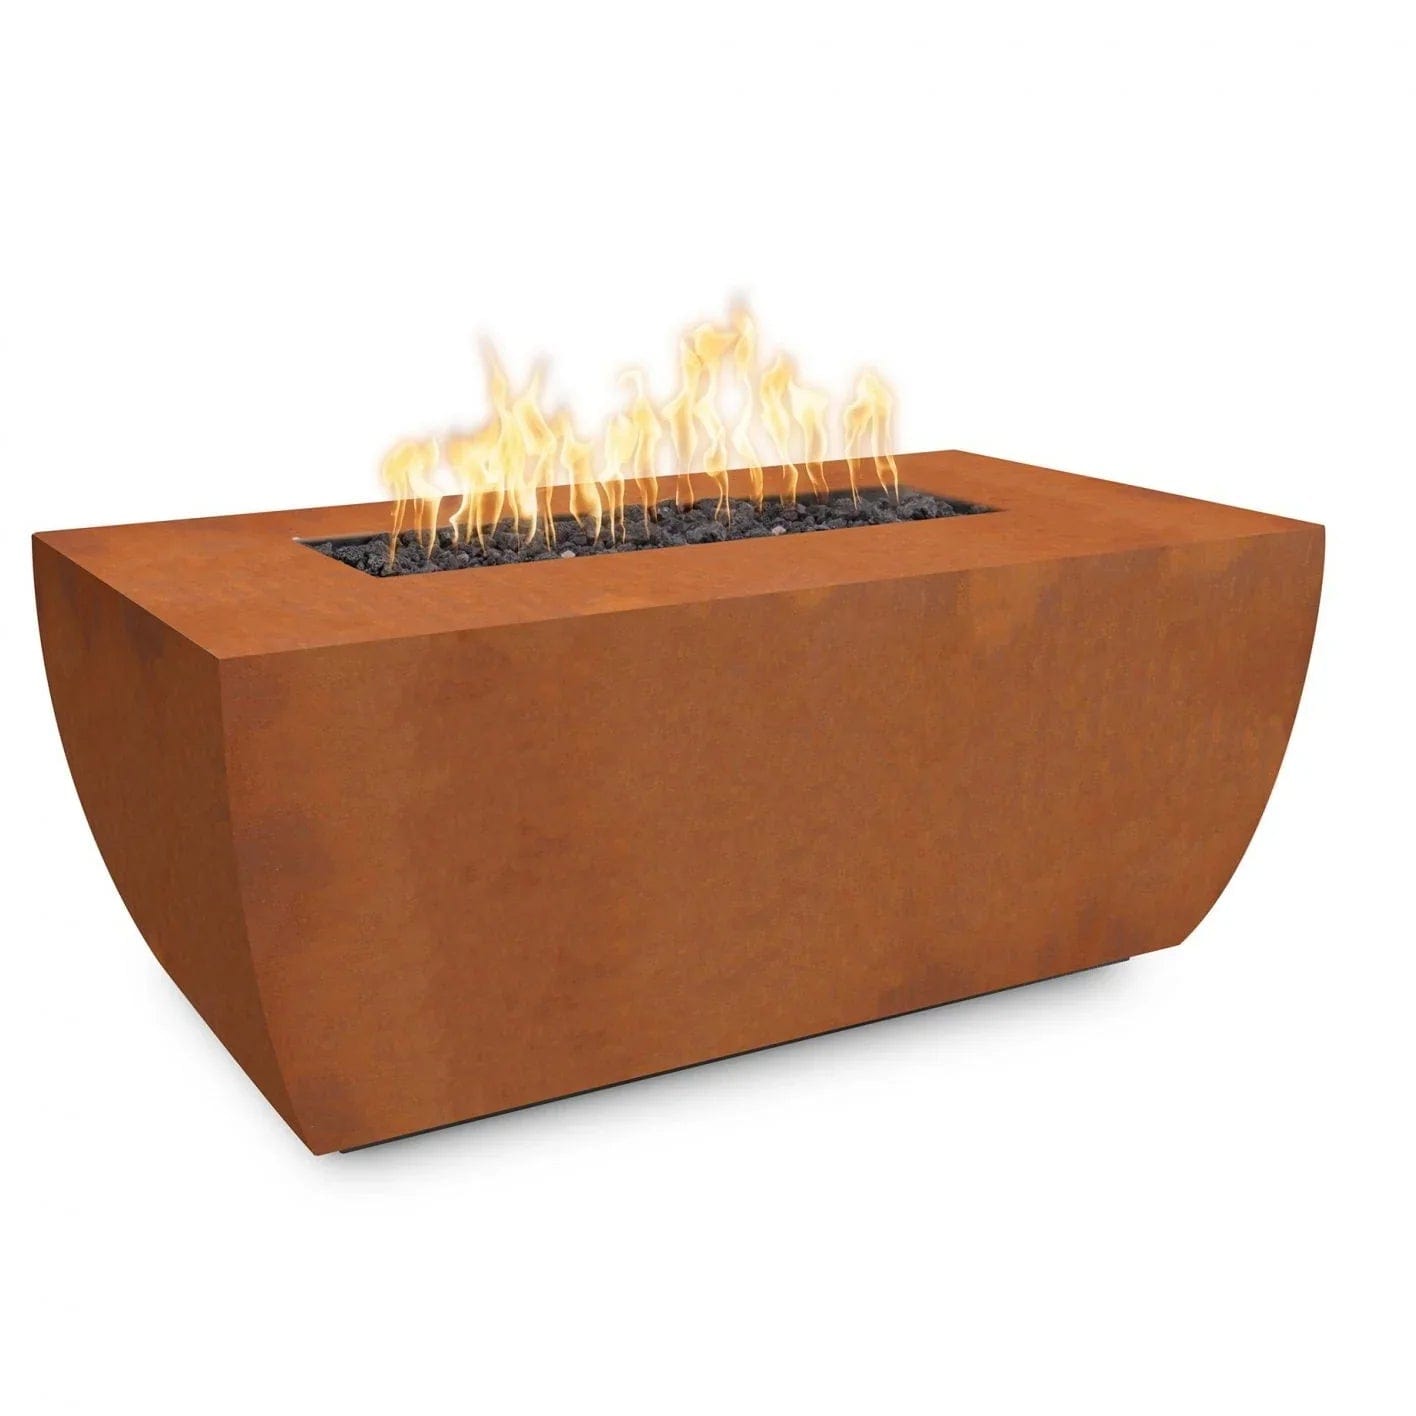 The Outdoor Plus Fire Pit 48" x 28" / Match Lit The Outdoor Plus Avalon 24" Tall Linear Fire Pit | Corten Steel OPT-AVLCS4824